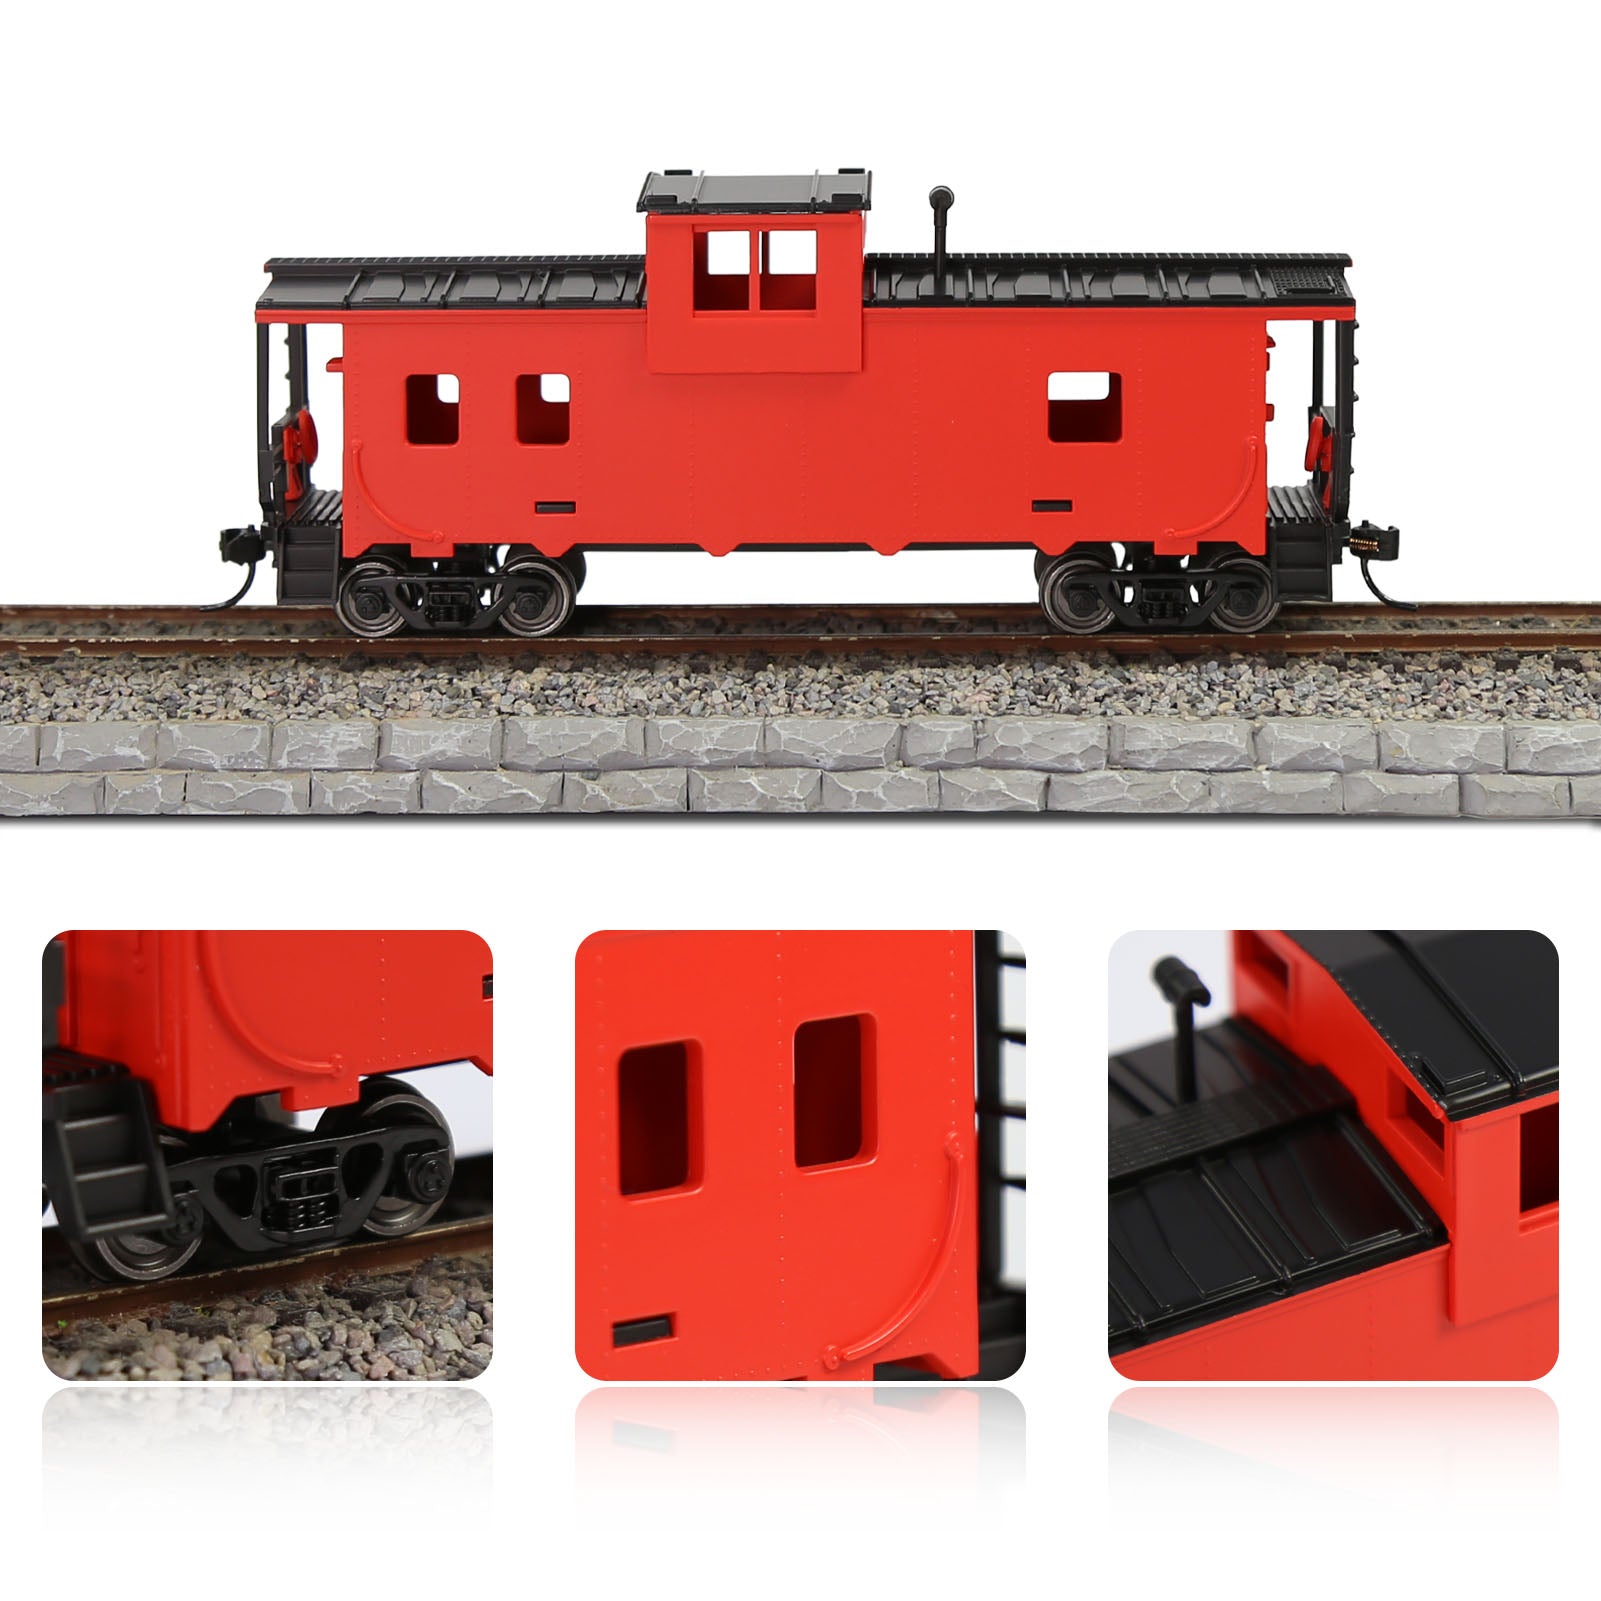 C8763 1pc HO Scale 1:87 Well Painted Unlettered HO Scale 36' Wide Vision Caboose Wagons